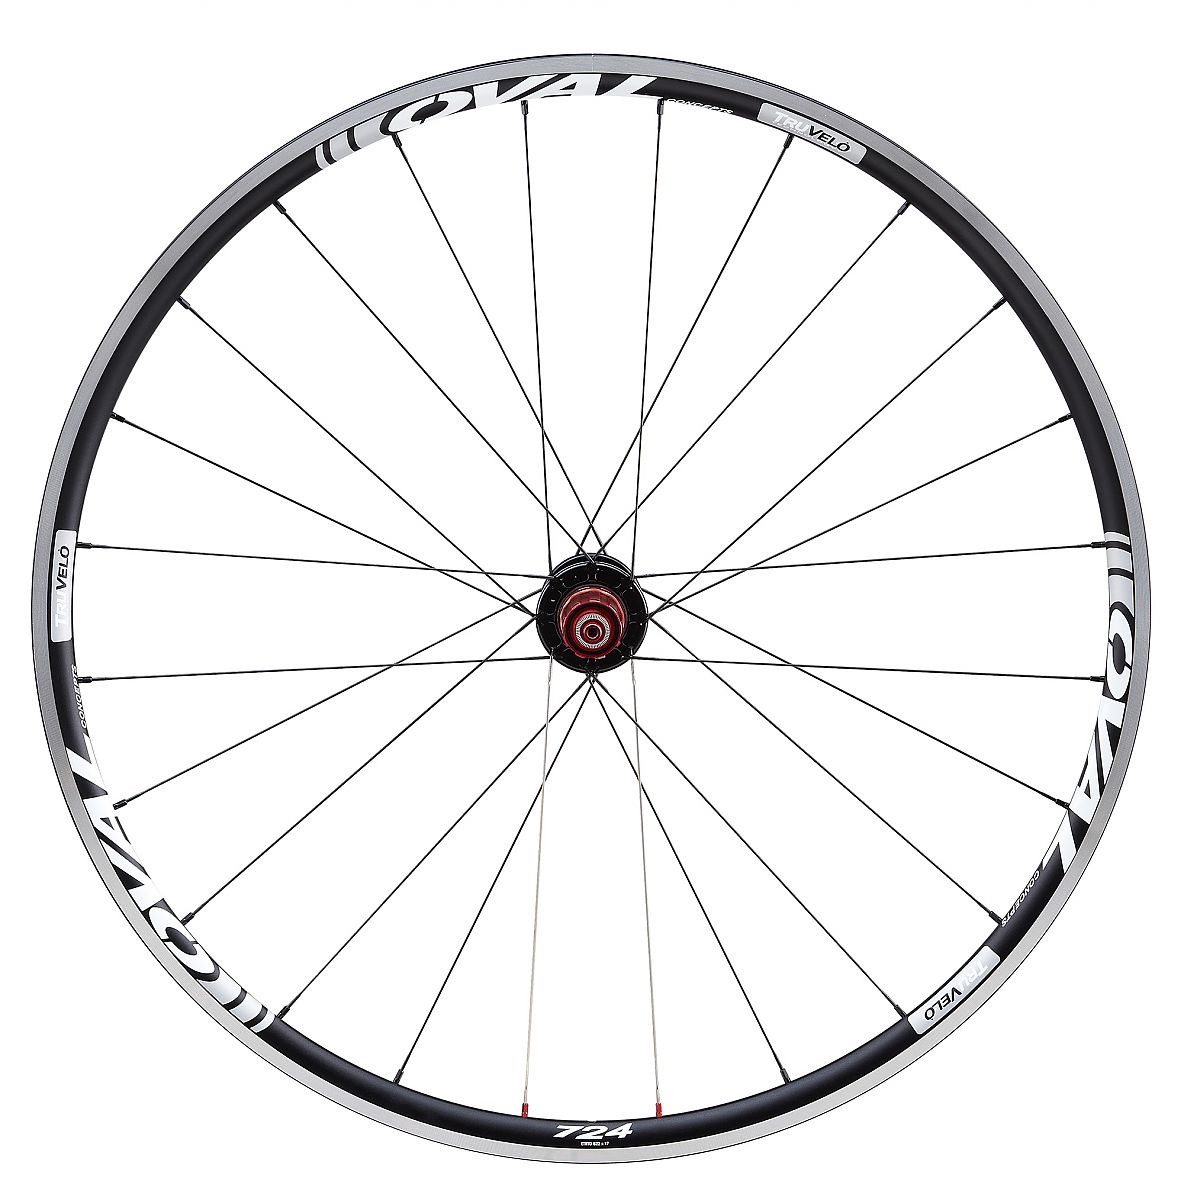 ASI's Oval Concepts renews wheel technology agreement with TruVelo ...